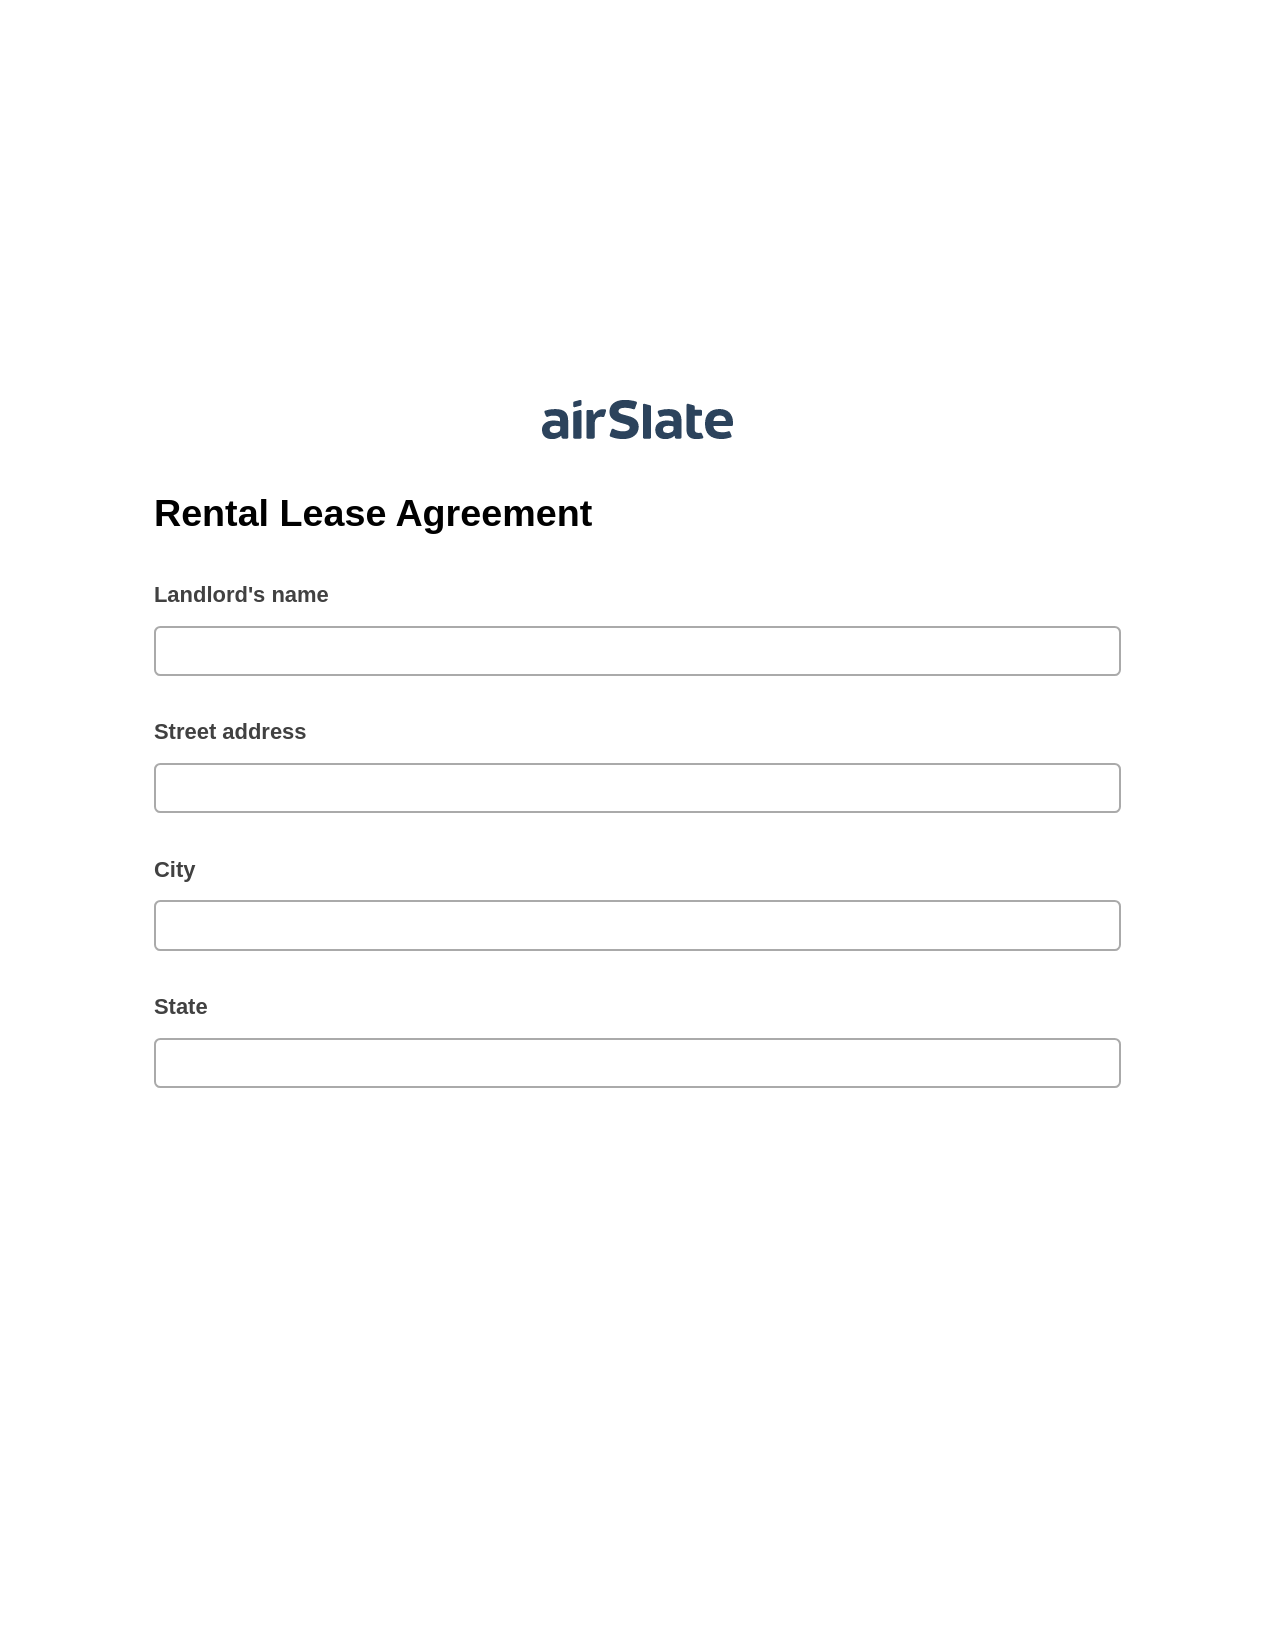 Multirole Rental Lease Agreement Pre-fill from MySQL Dropdown Options Bot, System Bot - Create a Slate in another Flow, Google Drive Bot